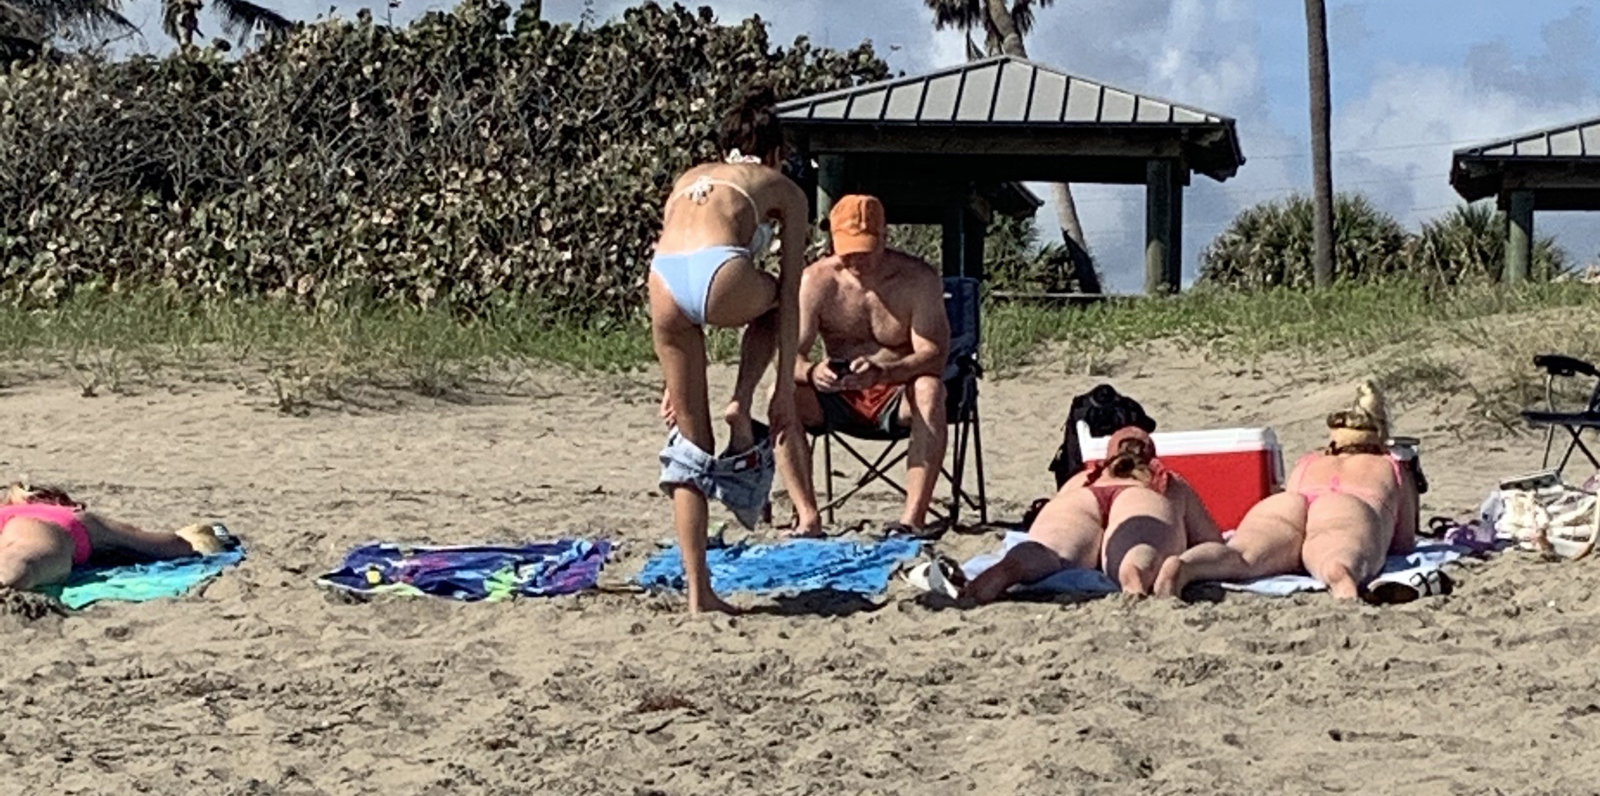 Photo by Creamsome with the username @Creamforall,  March 14, 2020 at 3:56 PM. The post is about the topic Voyeur and the text says 'Beach butts'